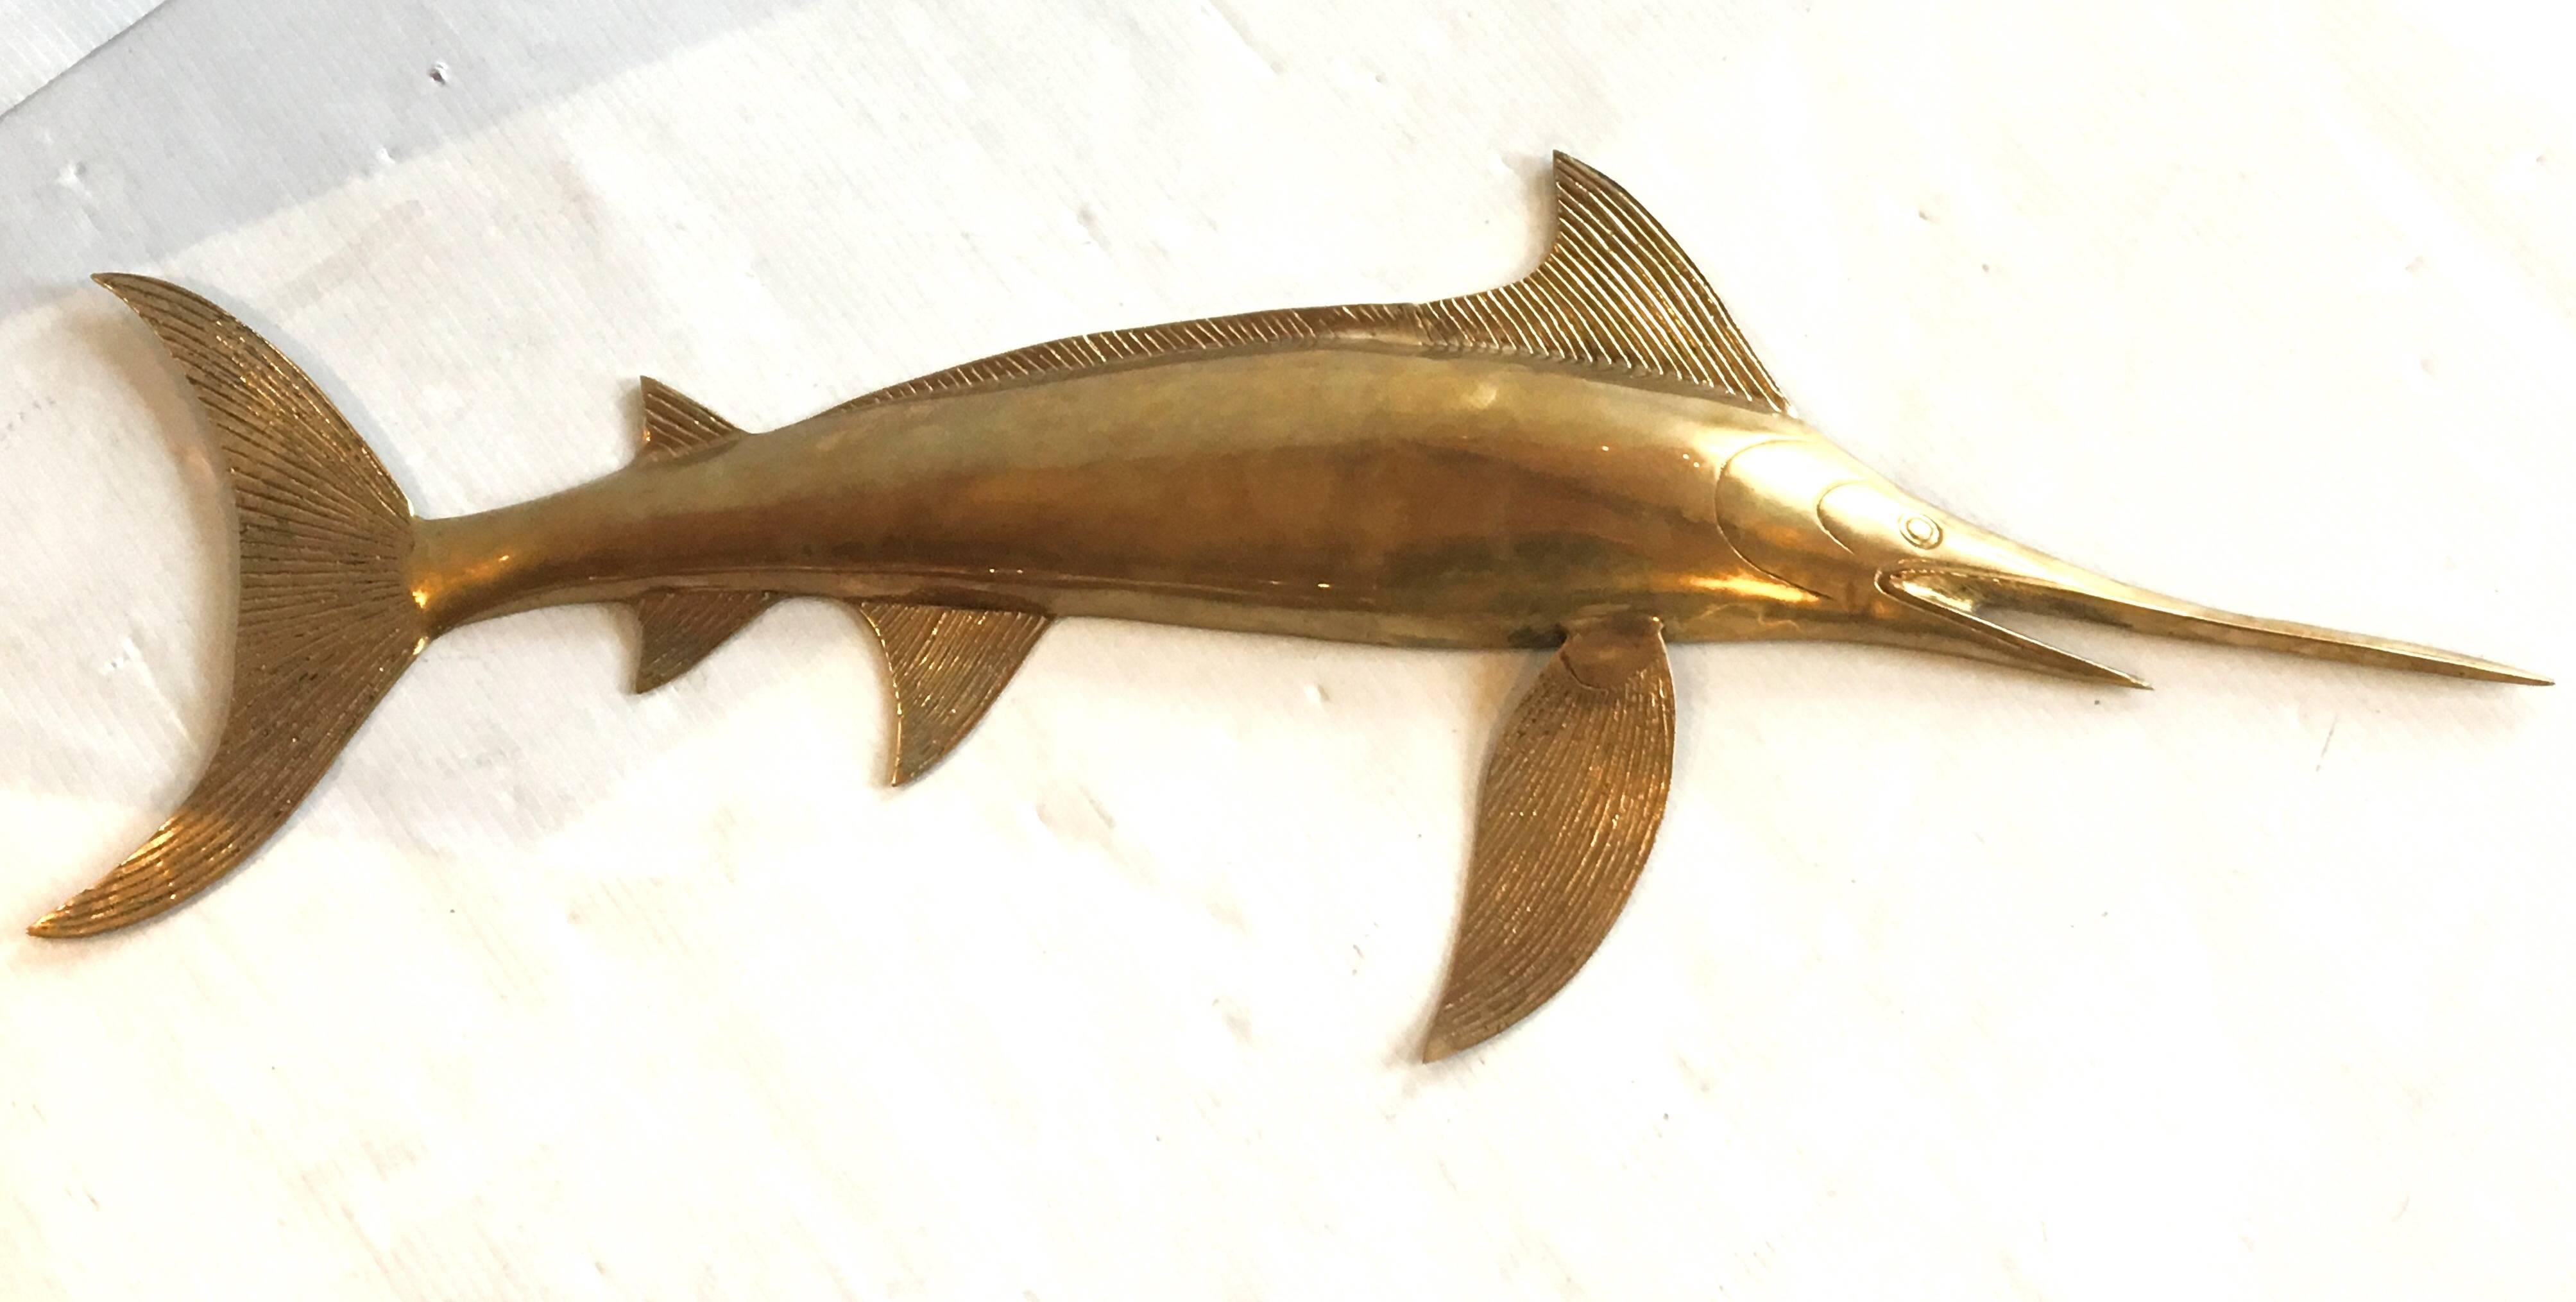 Nice elegant solid brass sailfish wall sculpture, circa 1980s easy to hang nice detail, polished brass.